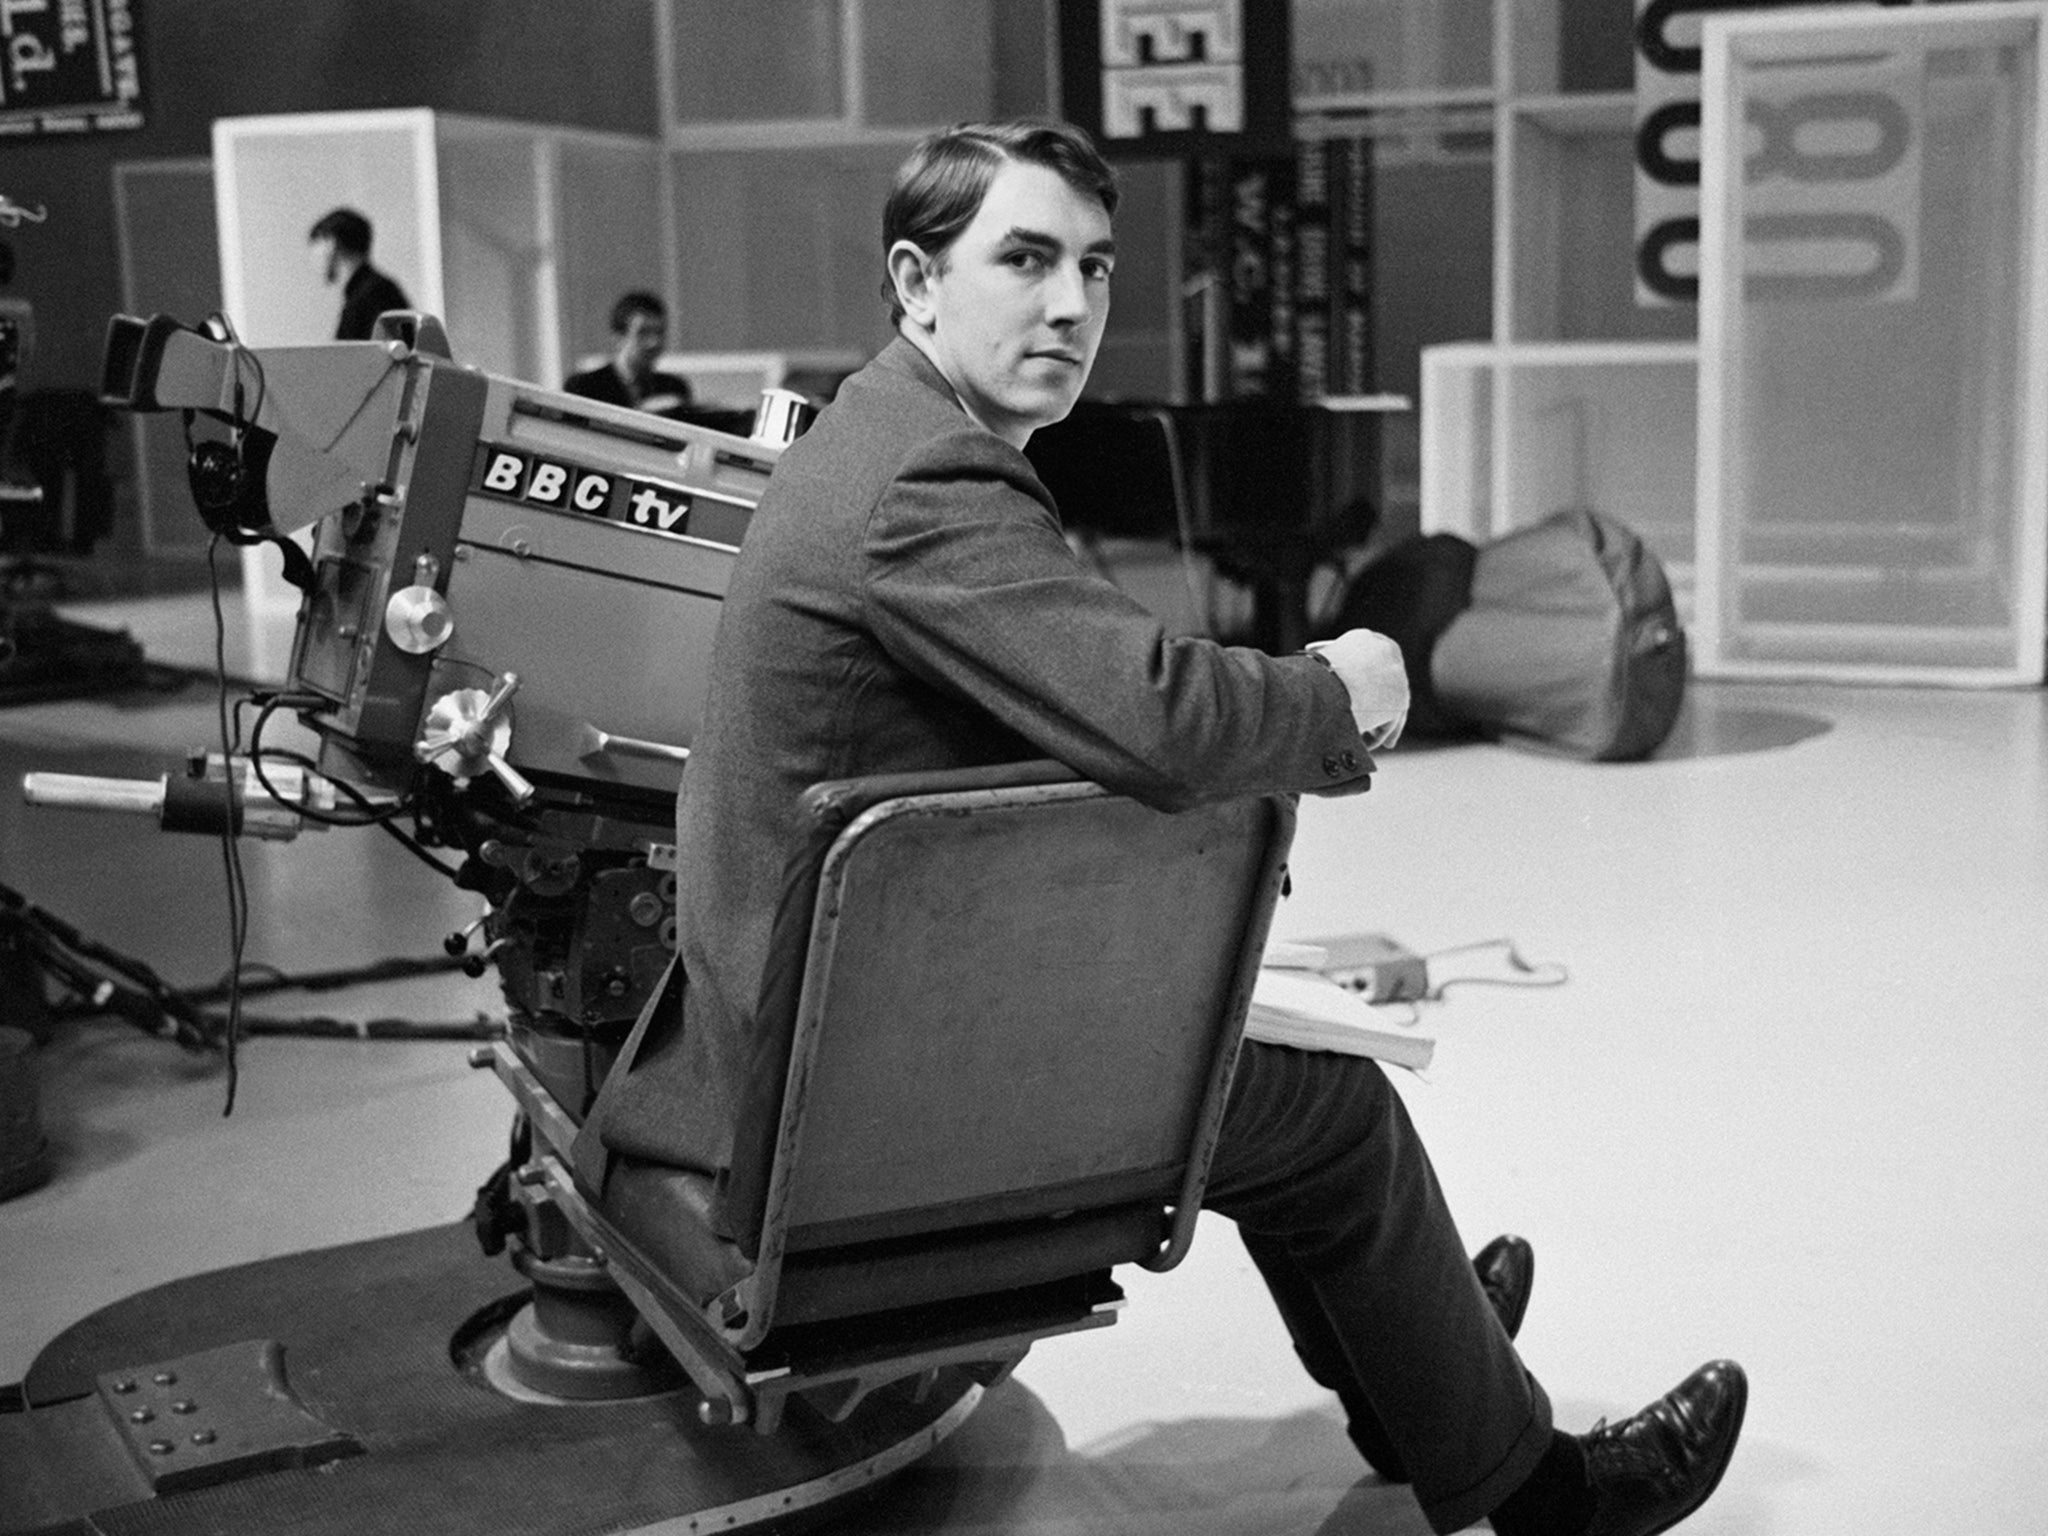 Peter Cook poses in a BBC studio in 1964?(Getty )